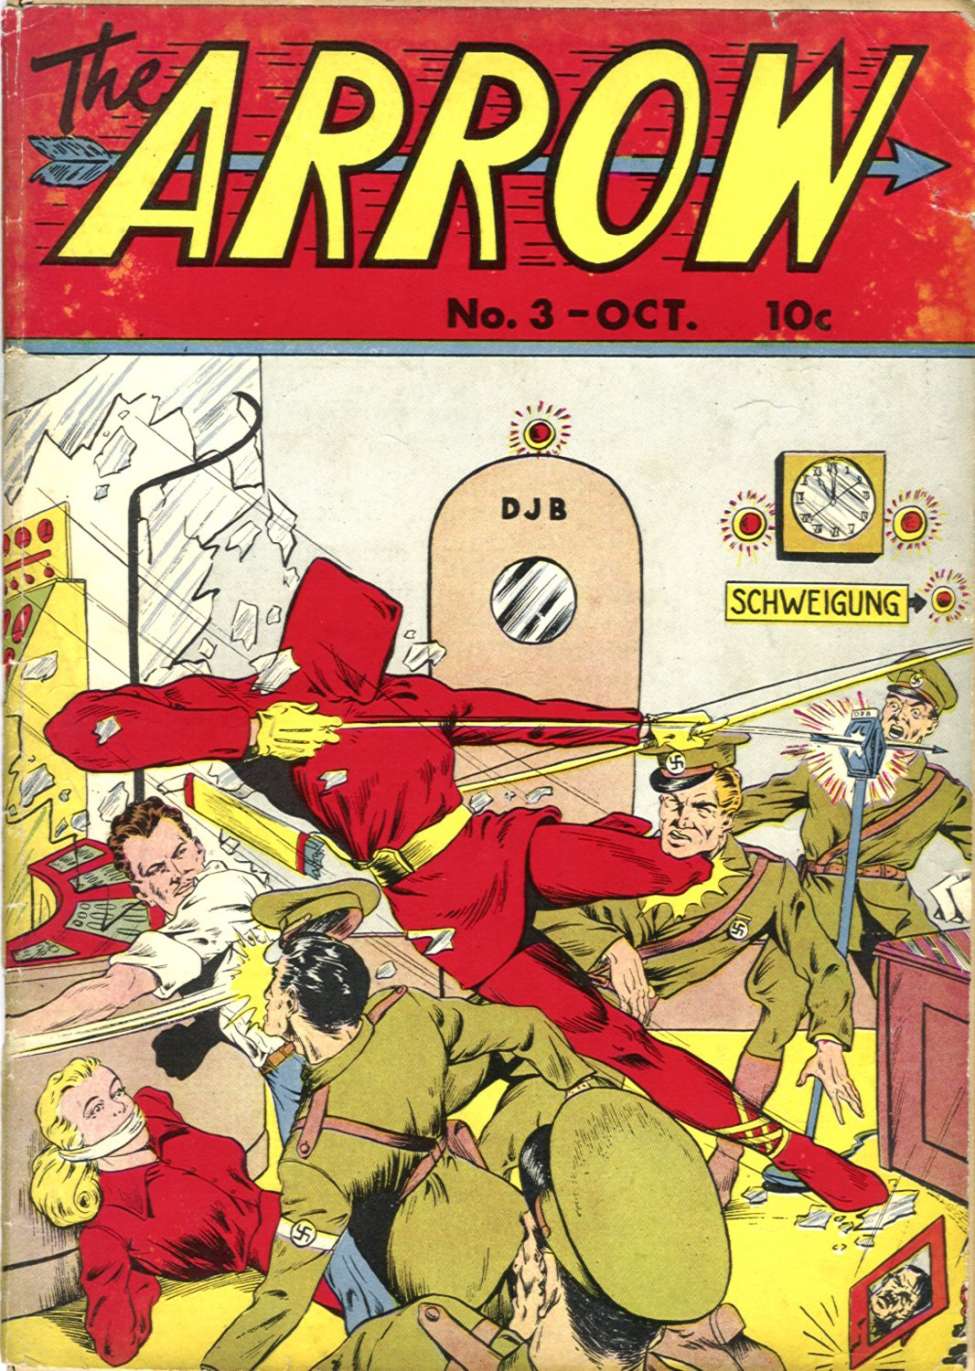 Book Cover For The Arrow 3